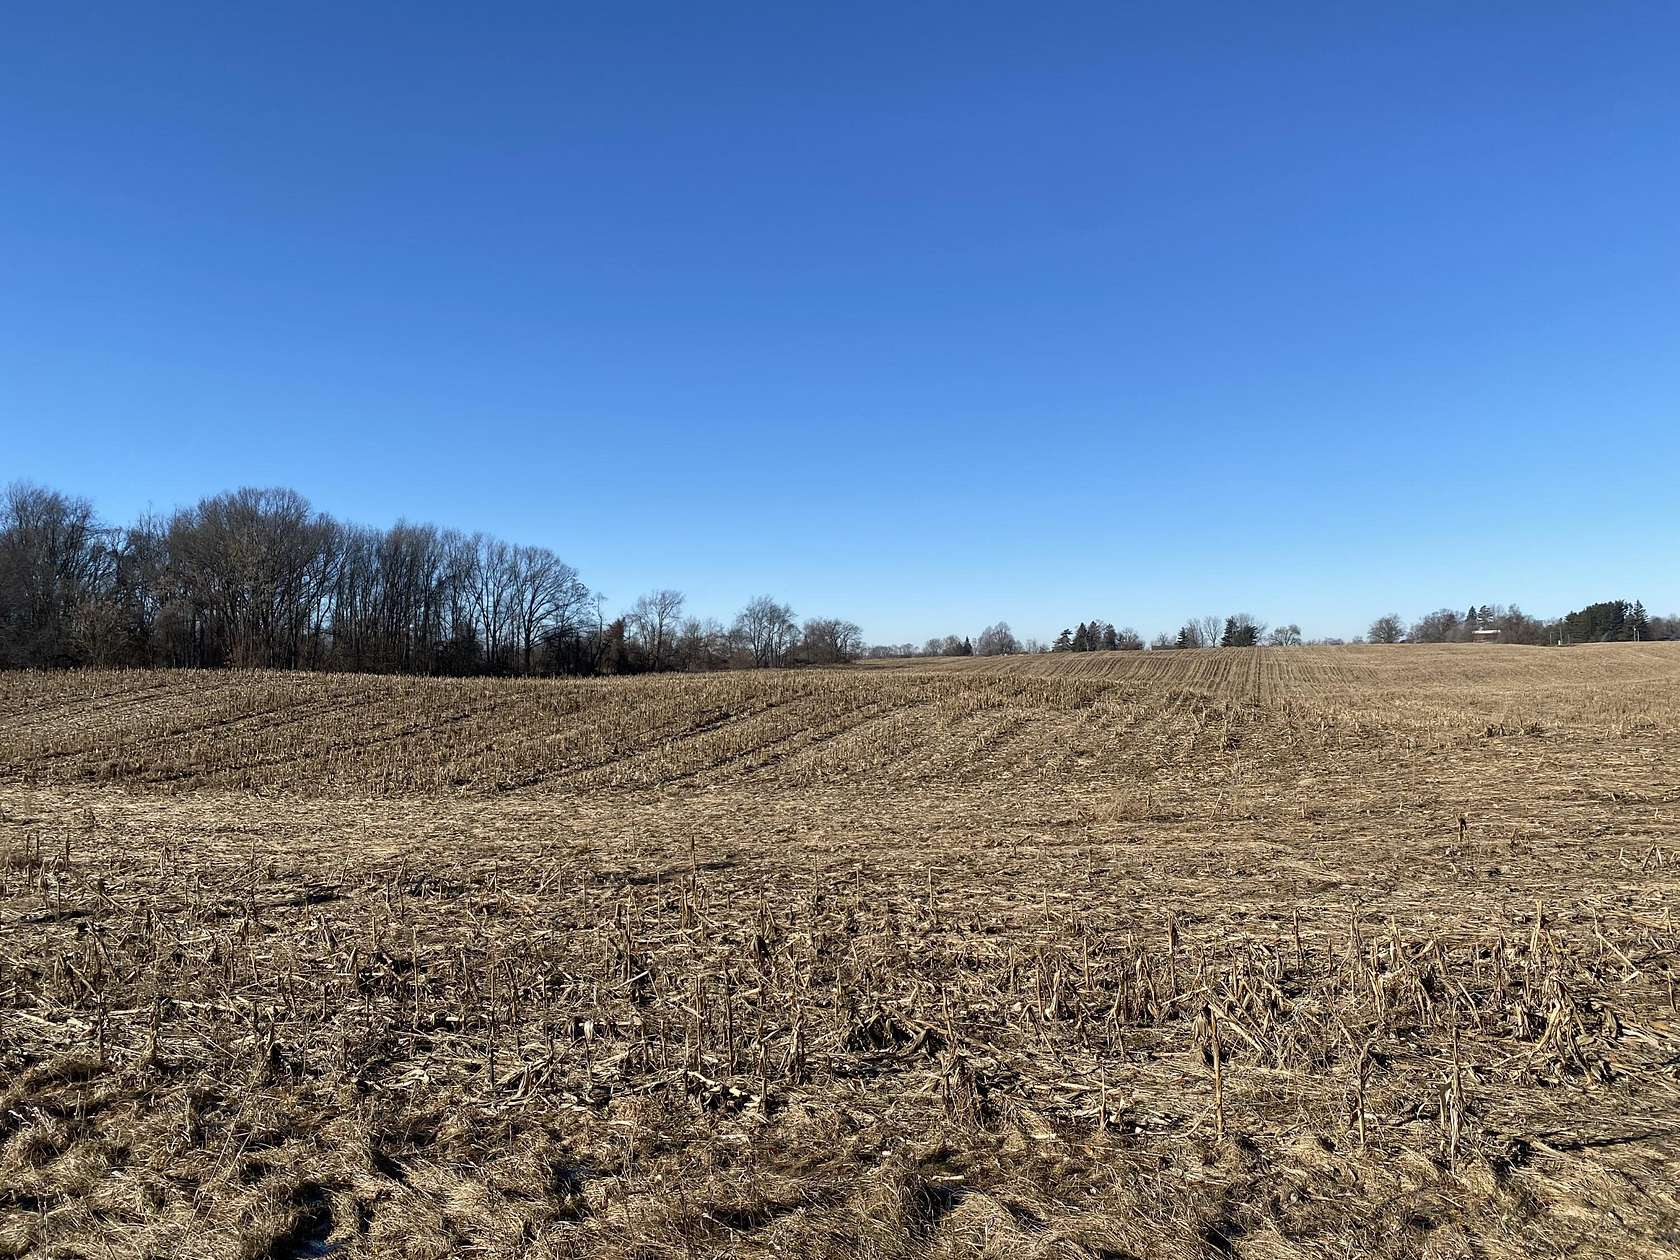 86.8 Acres of Agricultural Land for Sale in Sturgis, Michigan